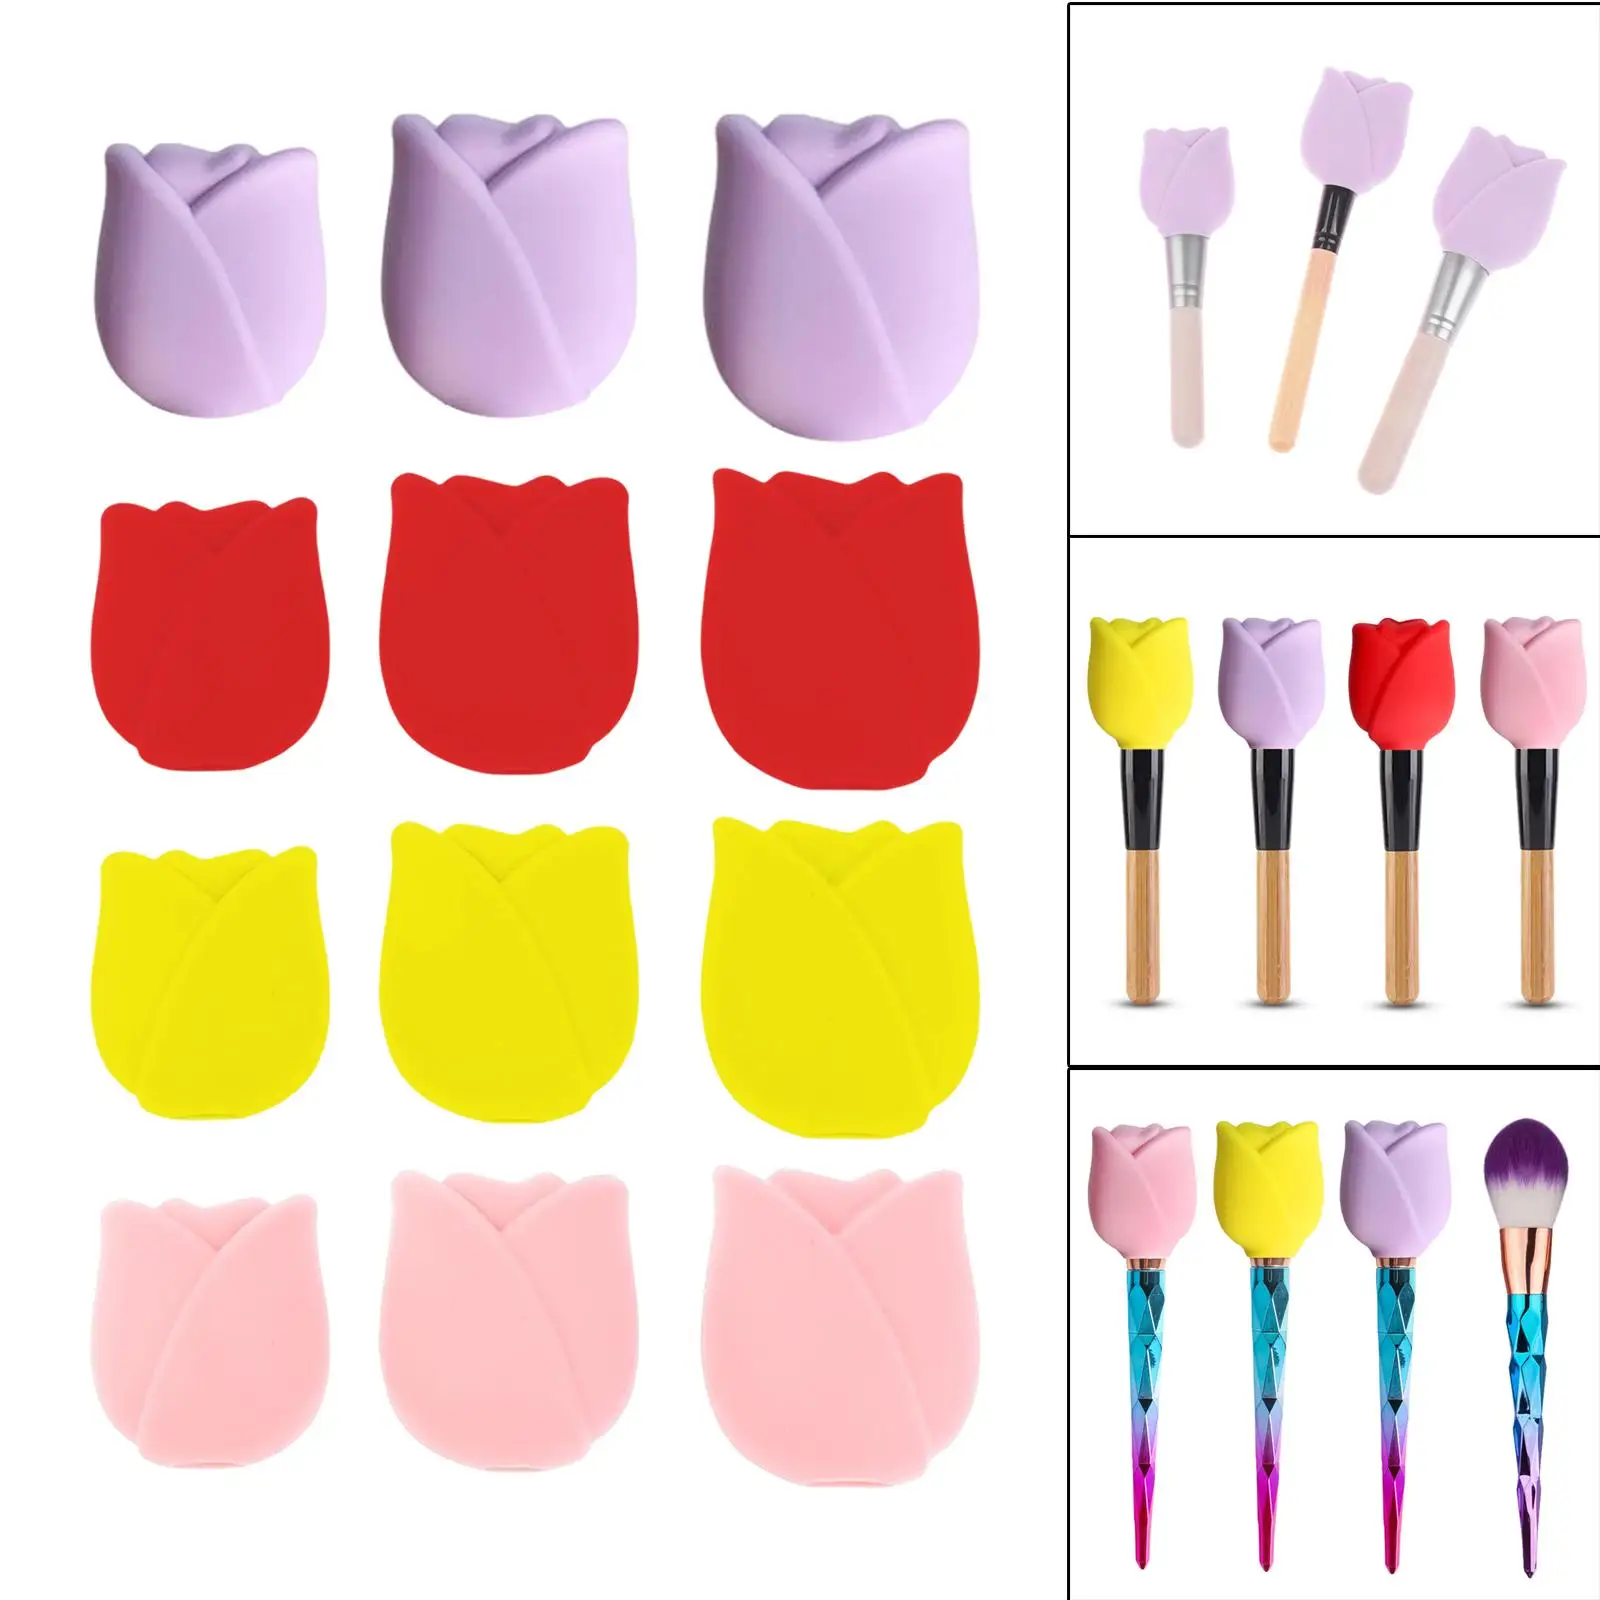 3Pcs Silicone Makeup Brush Cover Durable Organizer Cosmetic Brushes Cover for Travel Lovers